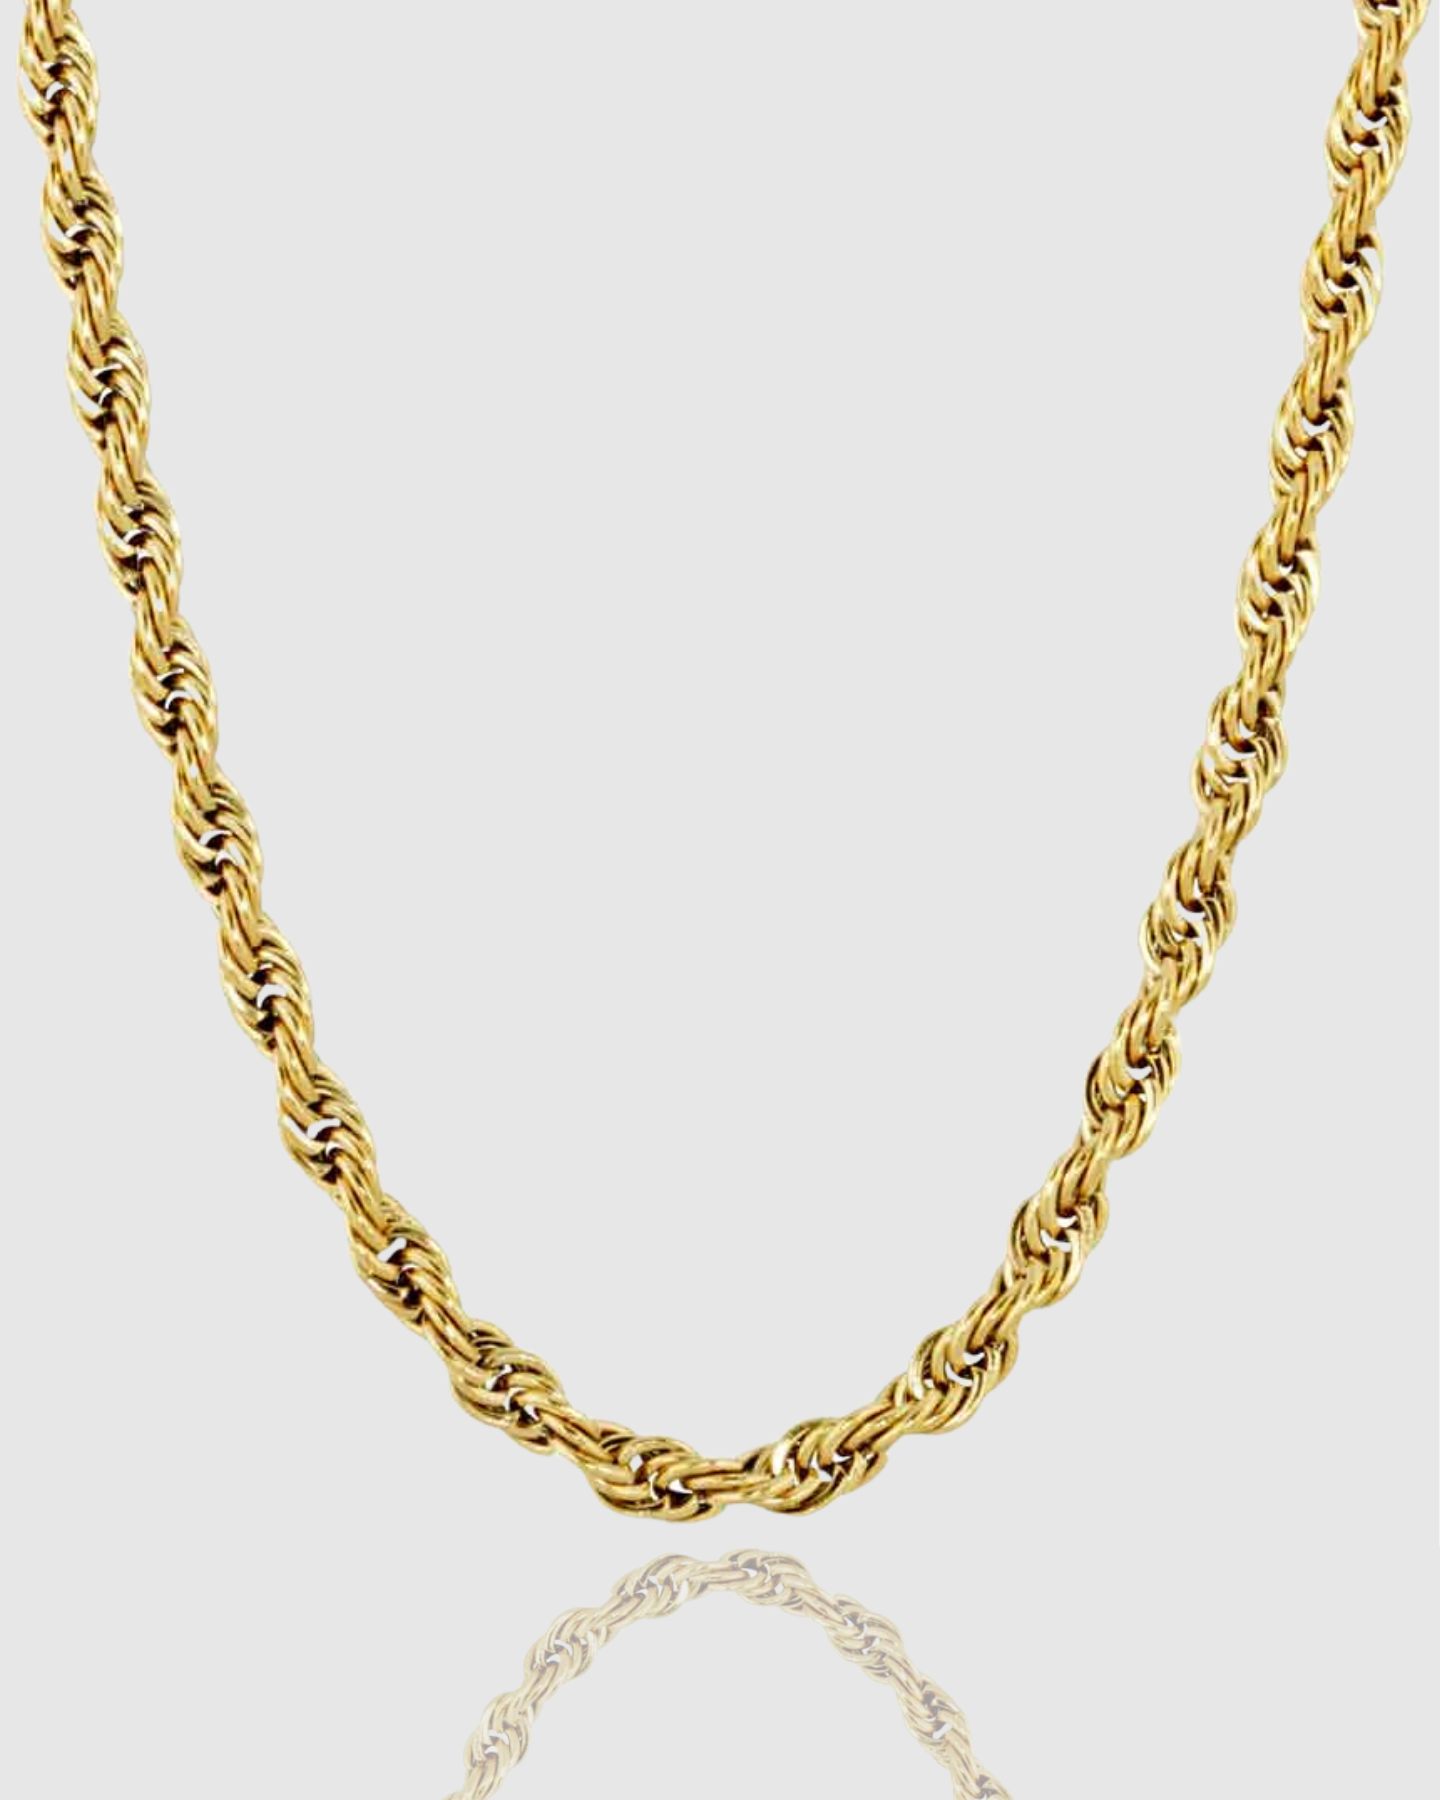 4mm rope chain - Gold